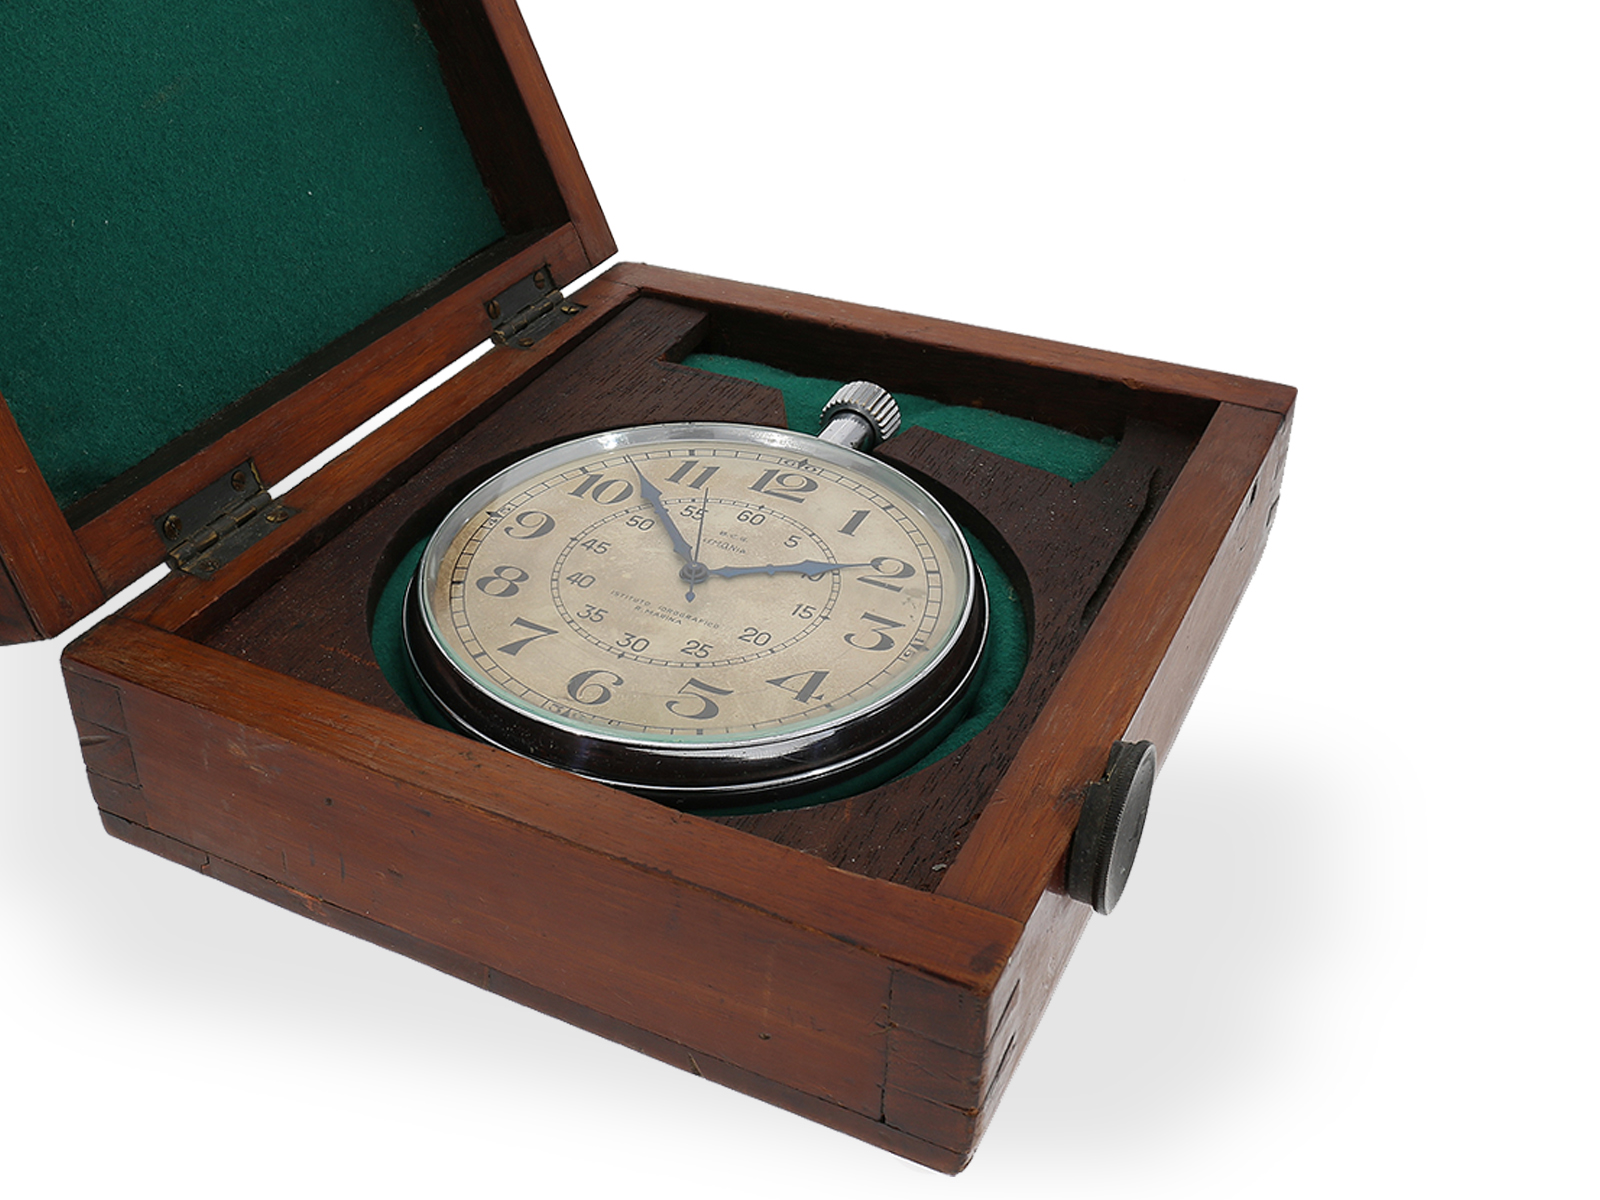 Rare Lemania deck watch from the collection of the "Royal Italian Hydrographic Institute" - Image 5 of 6